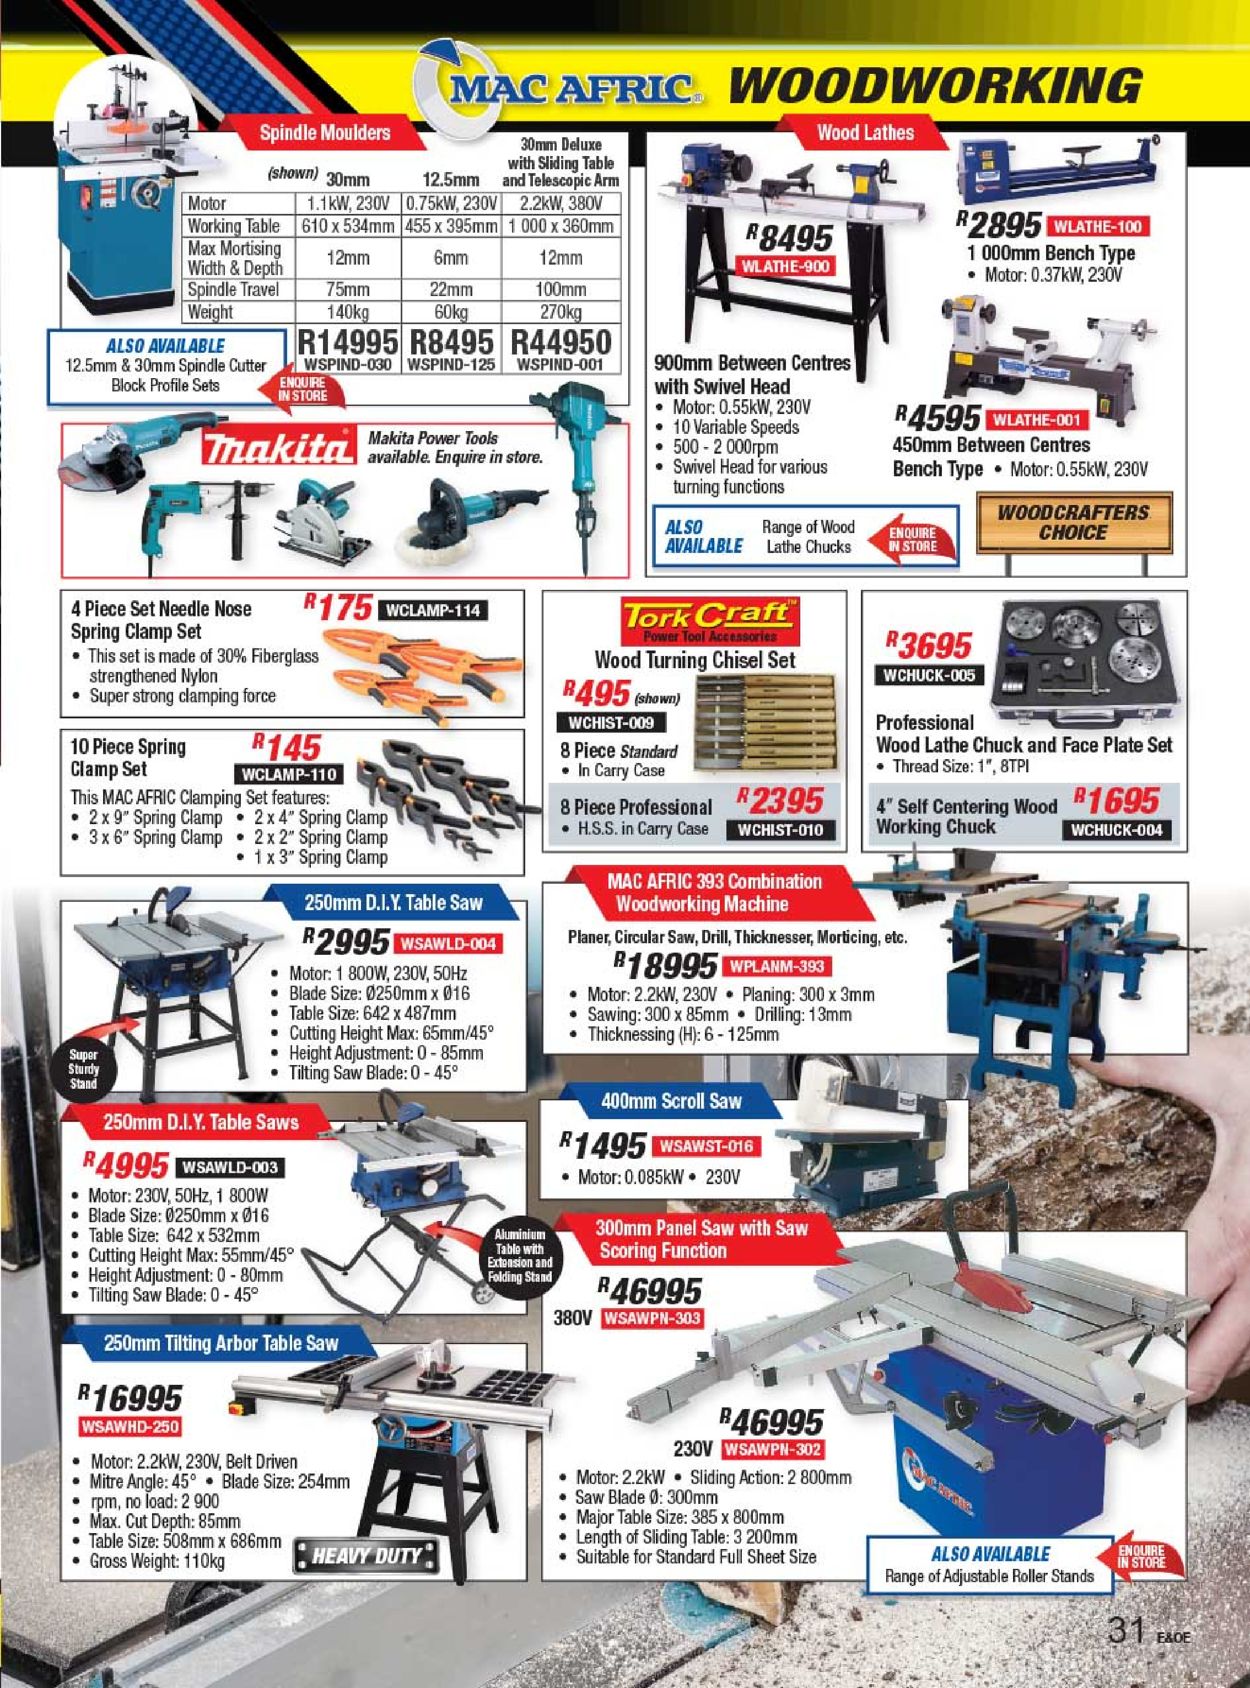 Adendorff Machinery Mart Catalogue from 2022/03/01